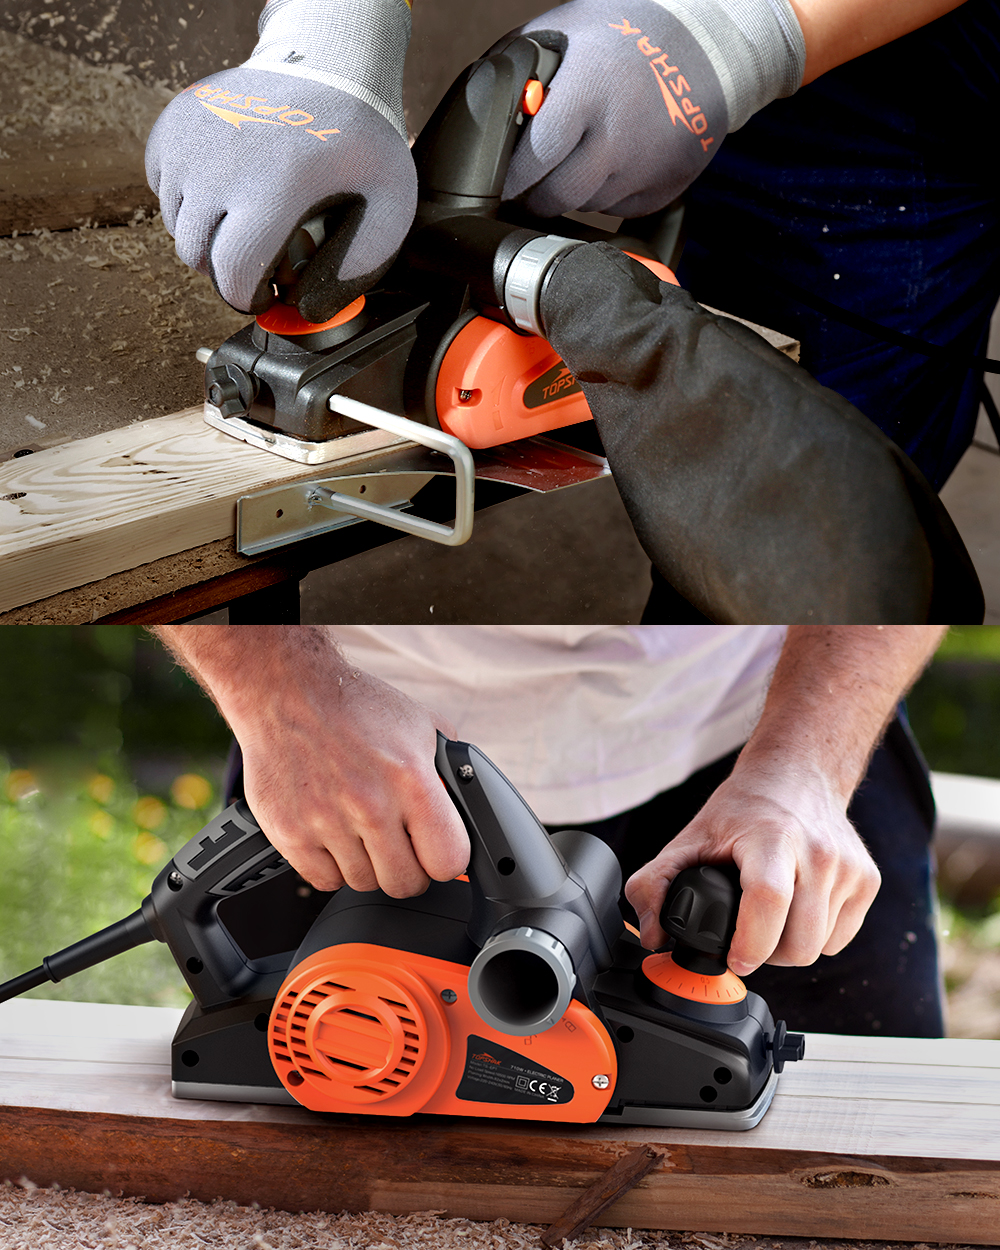 TOPSHAK-EP-1-6-Amp-Electric-Hand-Planer-16500min-32-Wood-Planer-with-Adjustable-Planing-Depth-Power--1911557-9